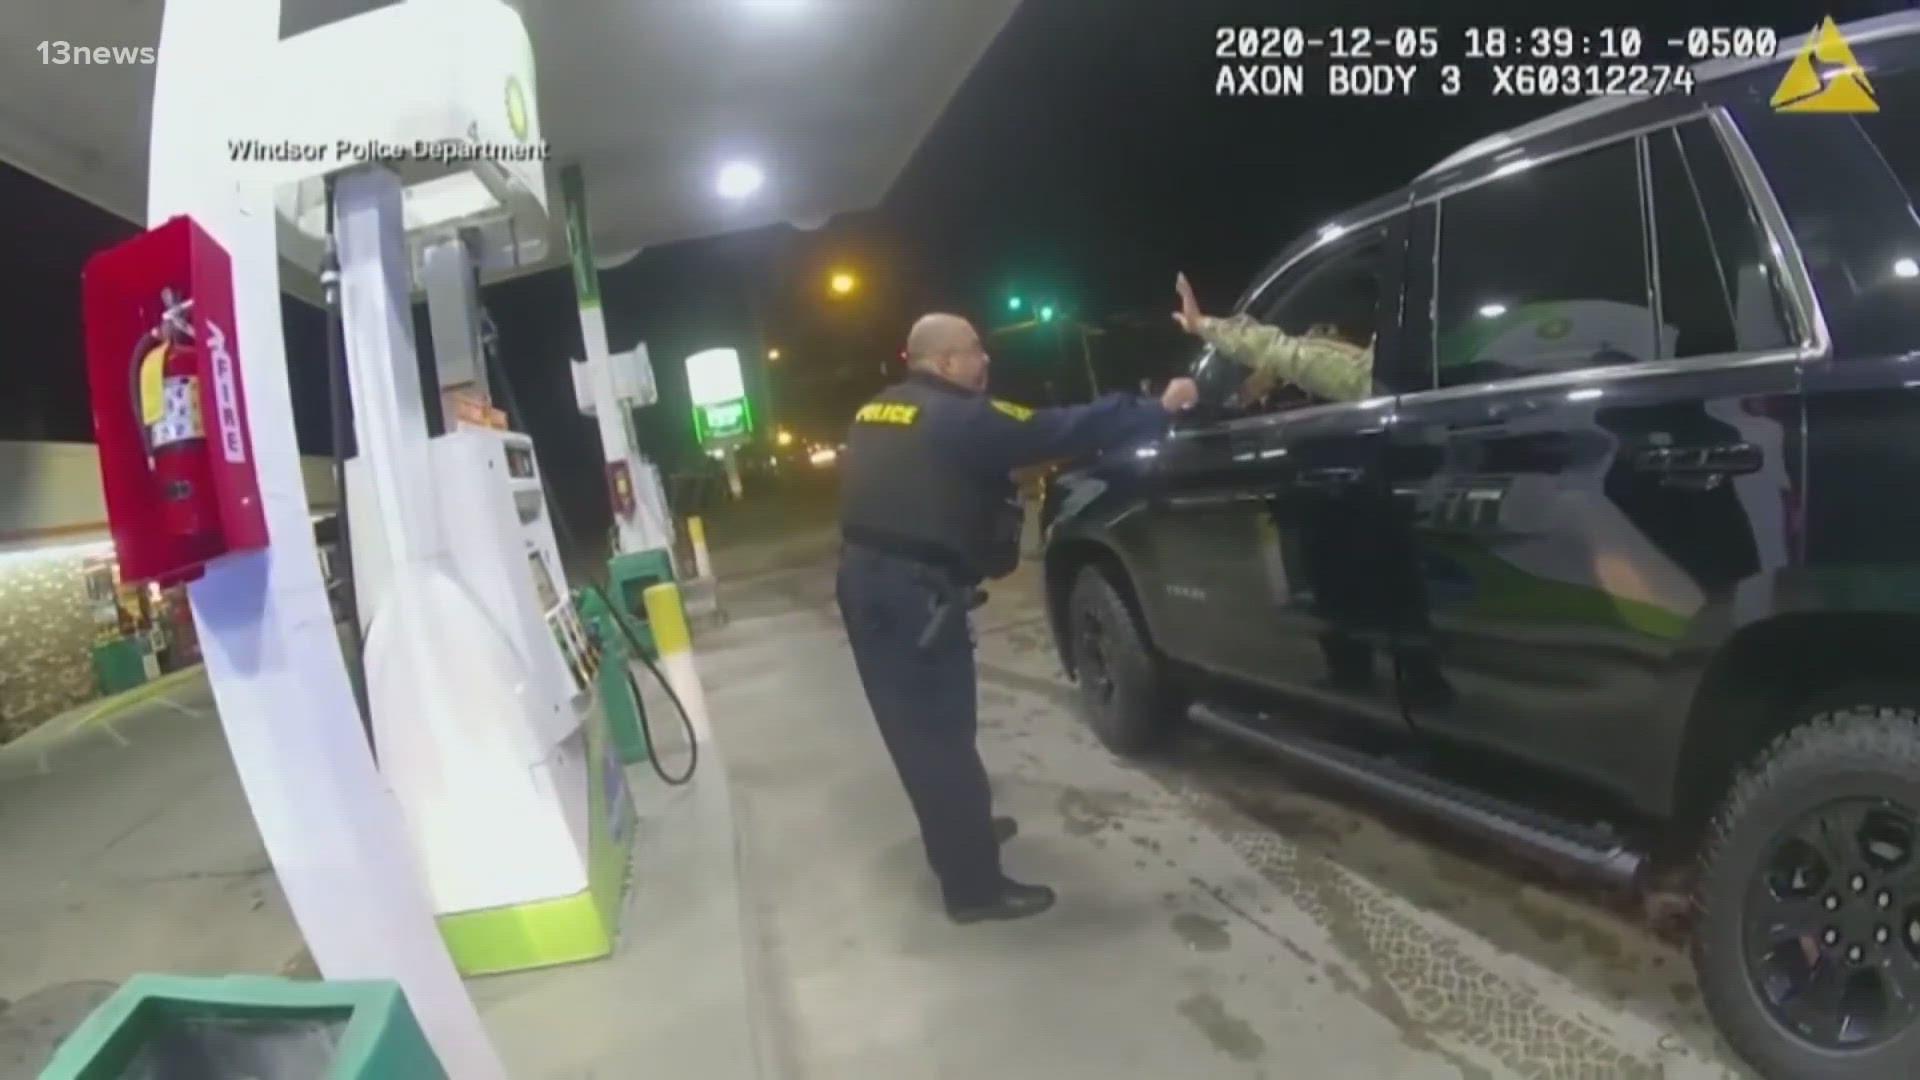 The lawsuit came after an investigation of a controversial 2020 traffic stop involving Caron Nazario, a Black Army lieutenant, who was pepper sprayed by 2 officers.